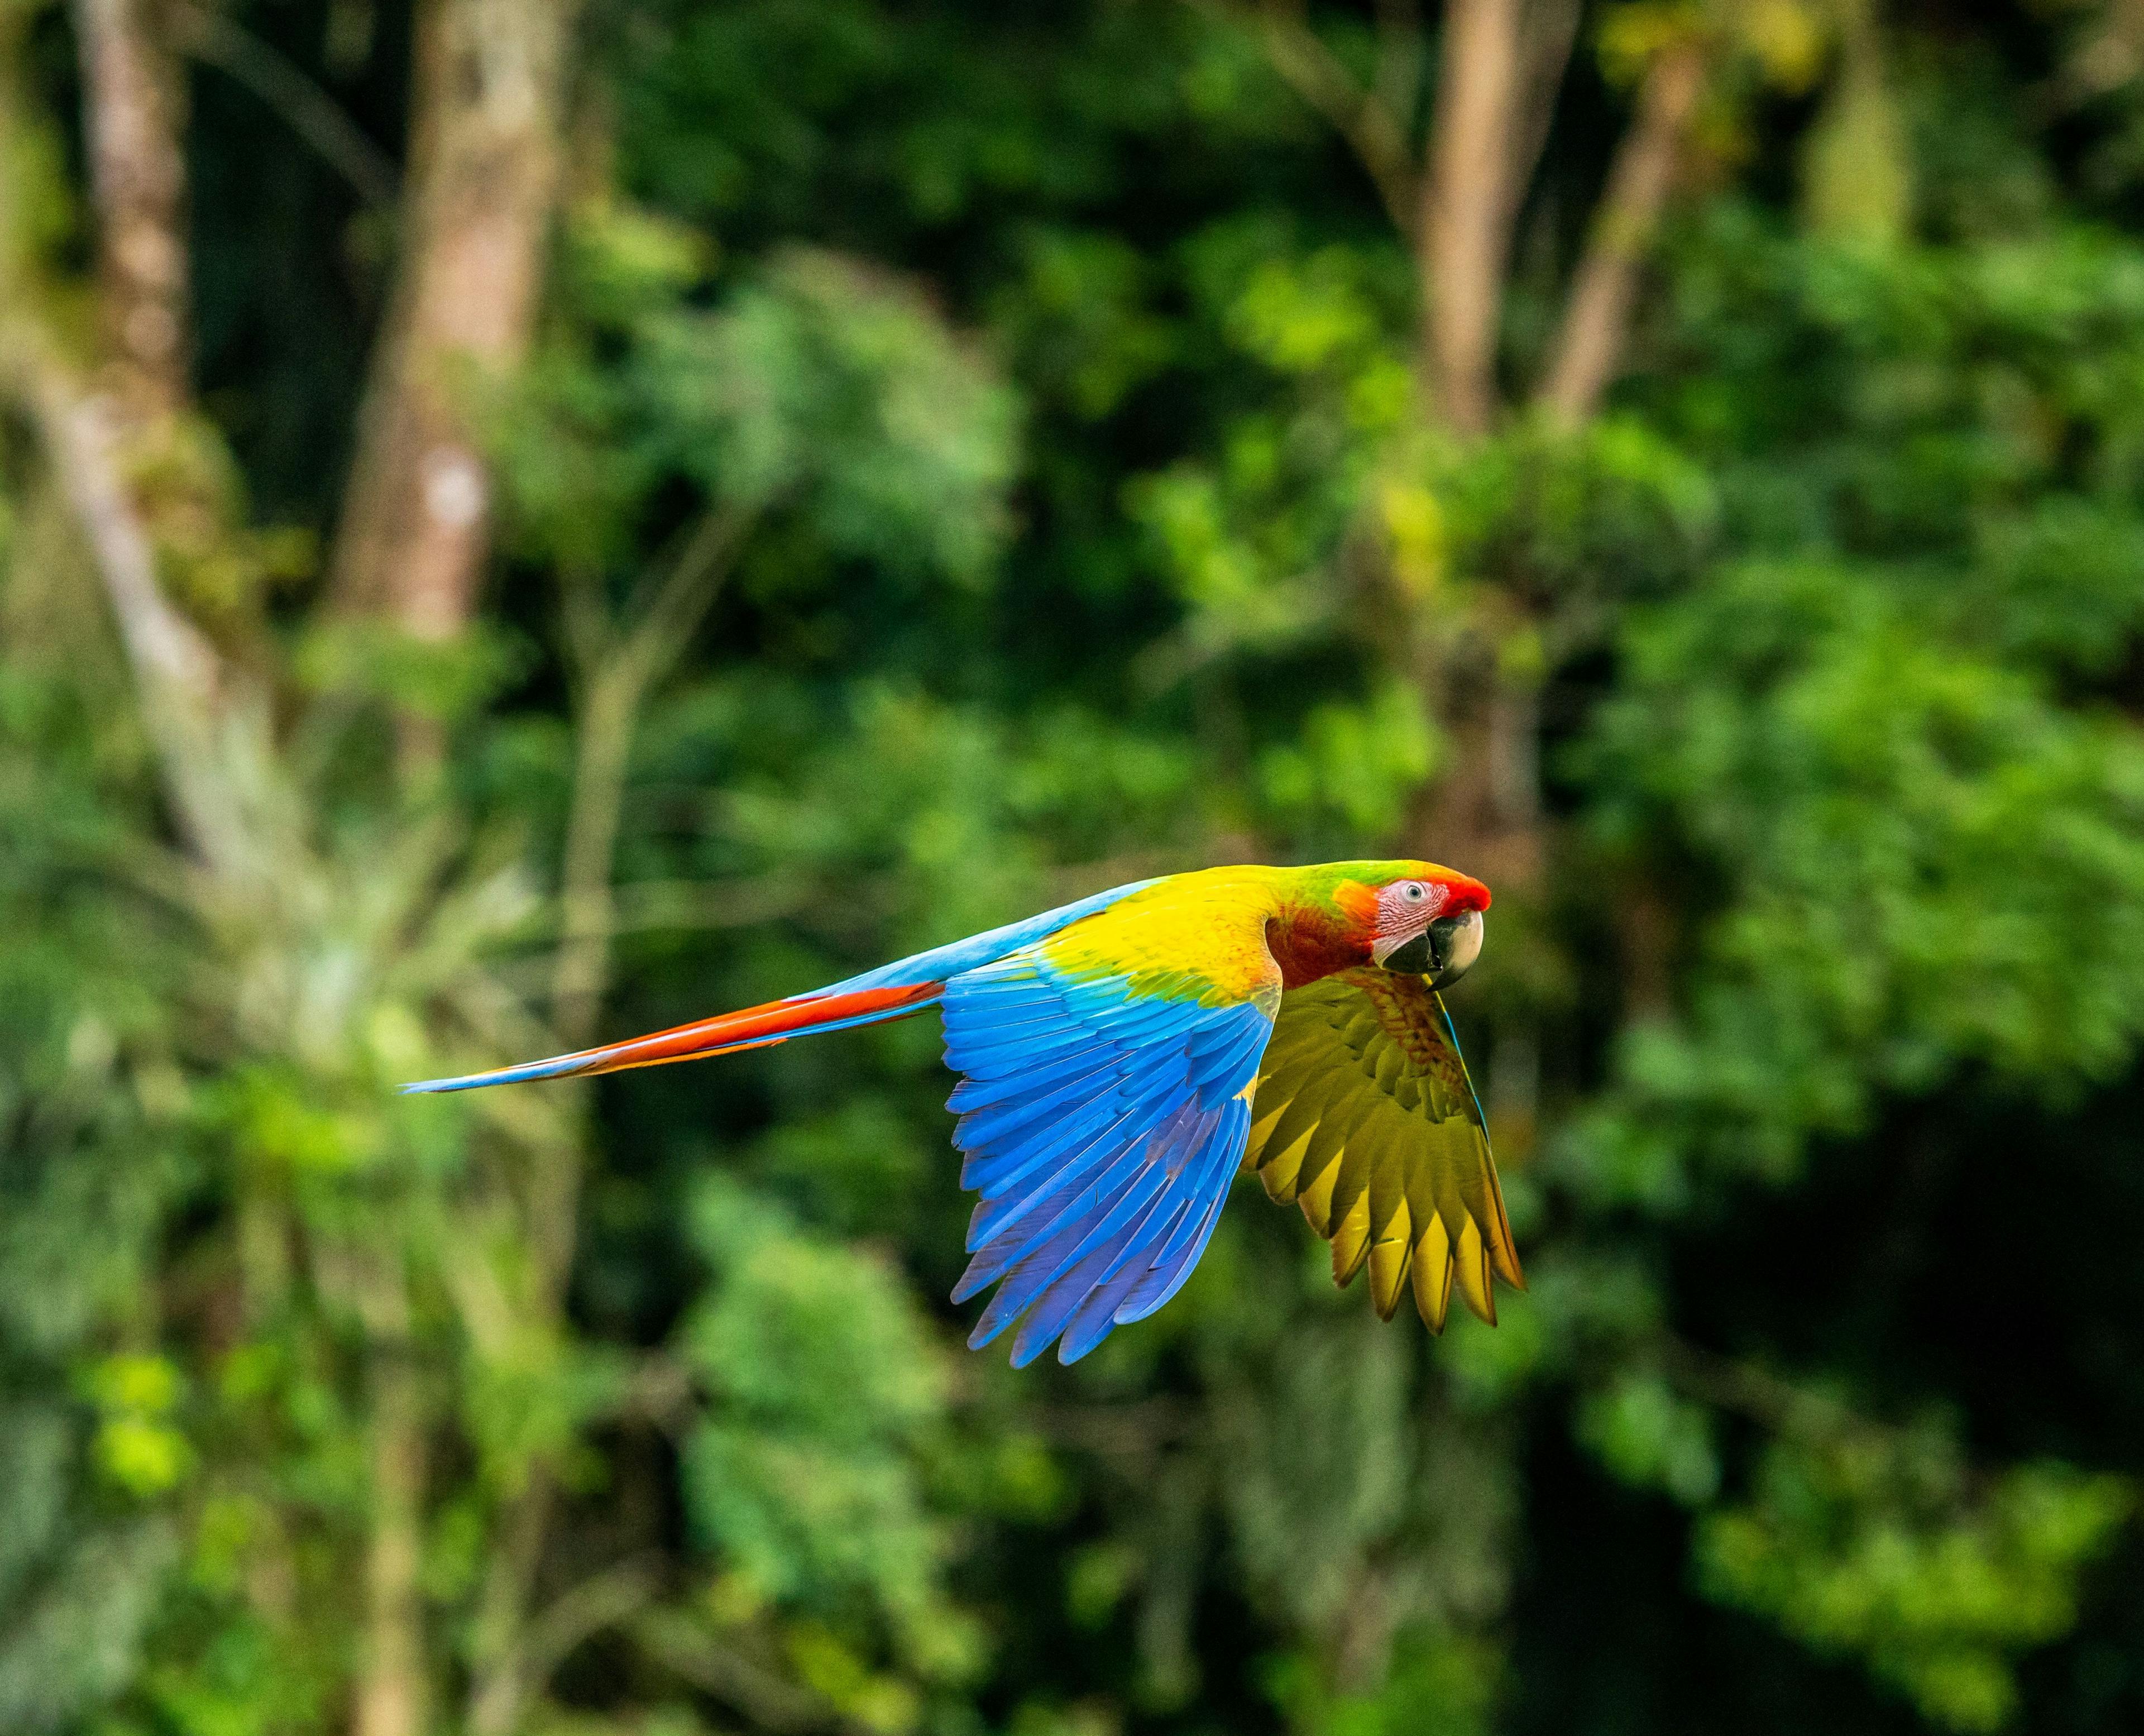 Parrot flying in the rainforest of Costa Rica.